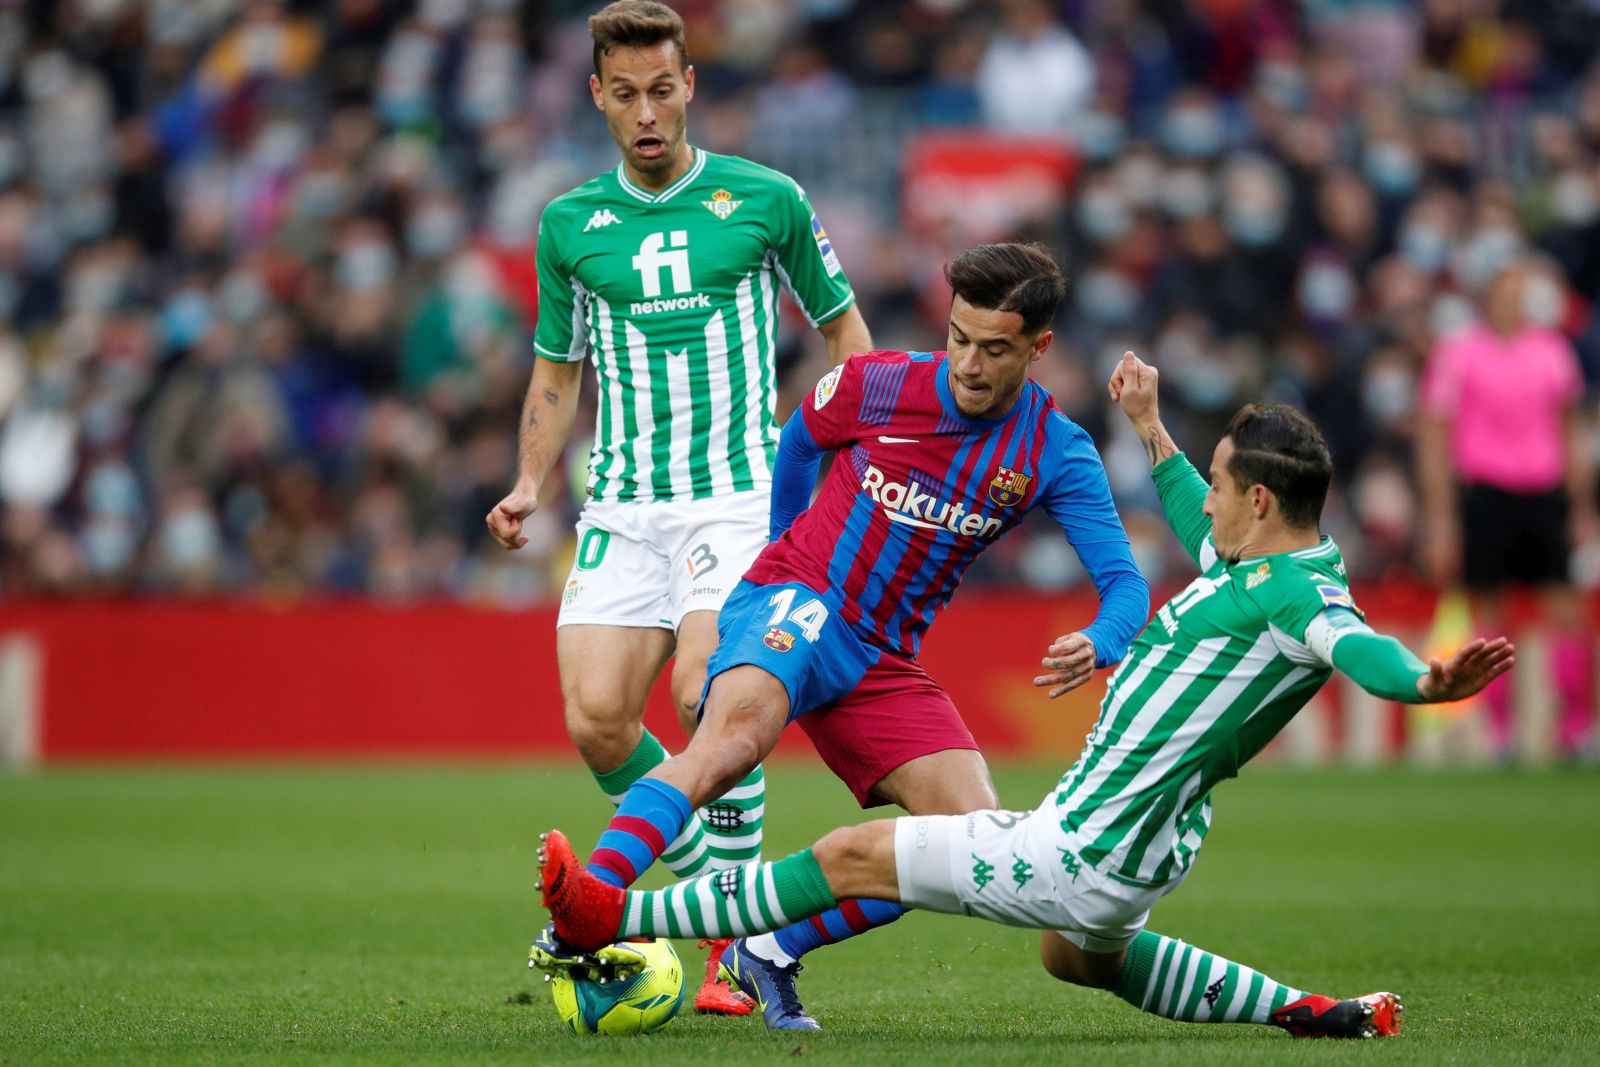 epa09621262 FC Barcelona's Philippe Coutinho (C) in action against Betis' Sergio Canales (L) and Andres Guardado (R) during their Spanish LaLiga soccer match between FC Barcelona and Real Betis Balompie at Camp Nou stadium in Barcelona, Catalonia, Spain, 04 December 2021.  EPA/Alejandro Garcia